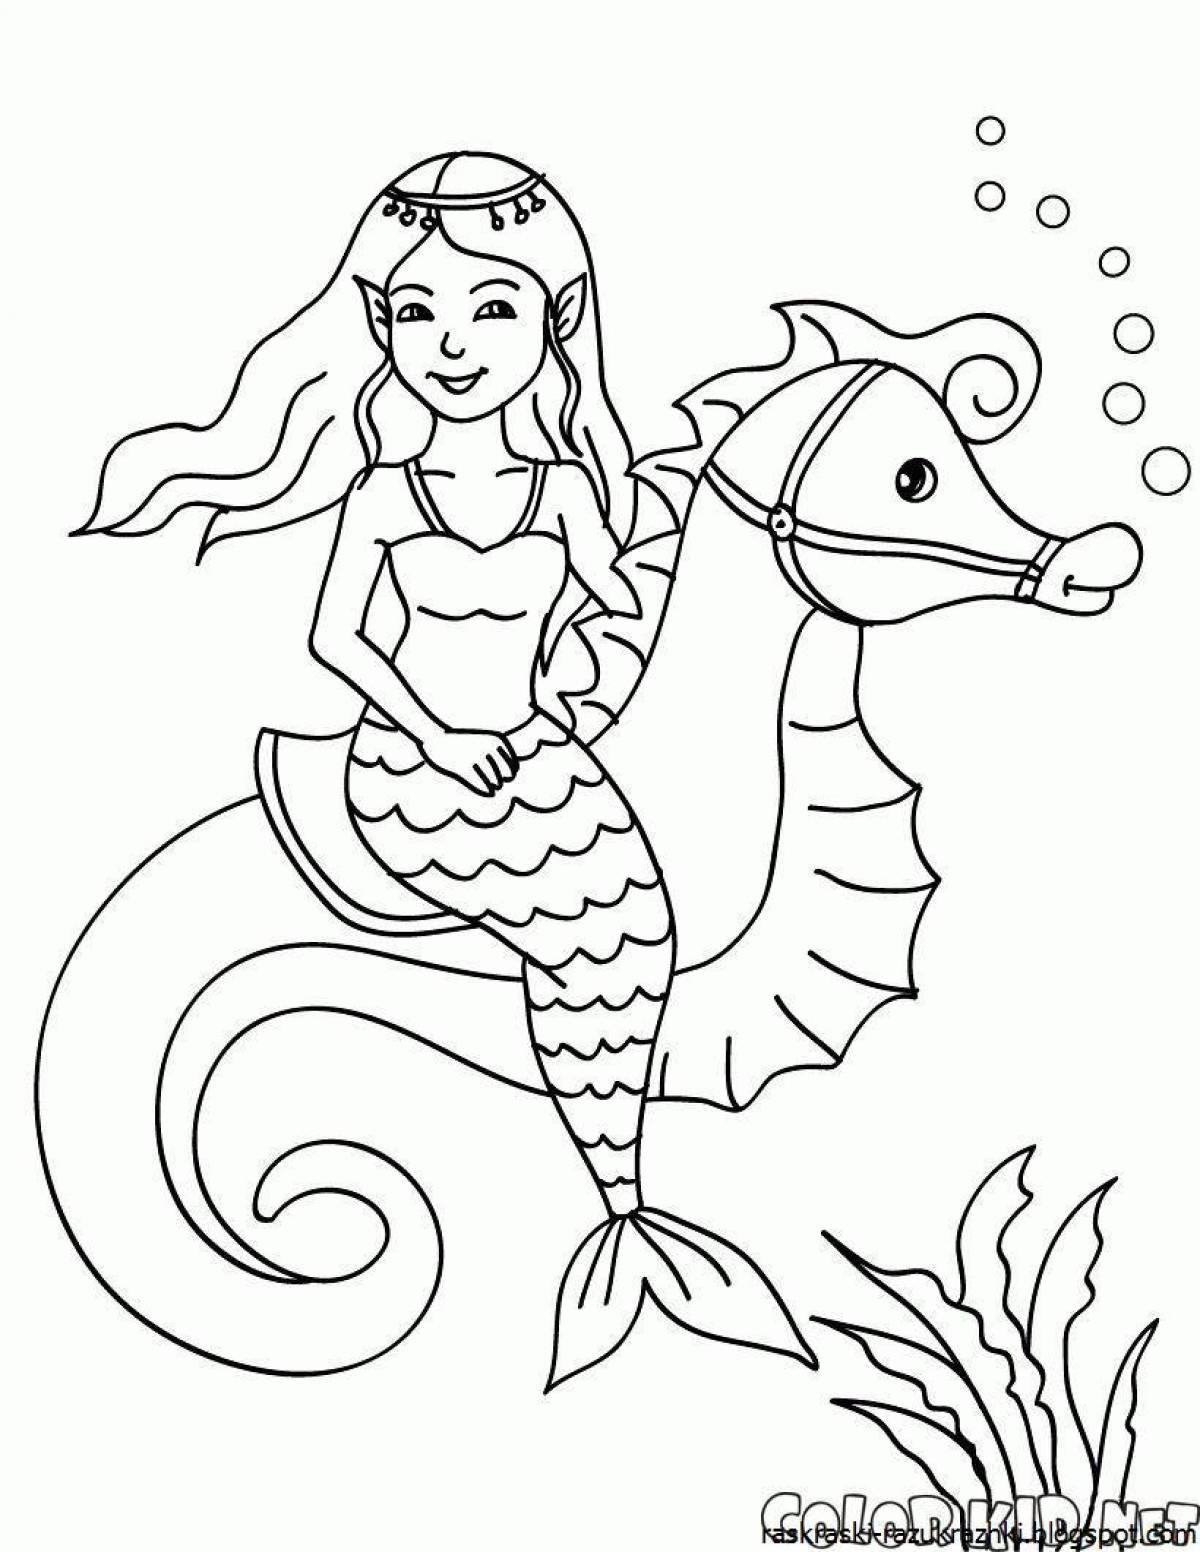 Live coloring mermaid for kids